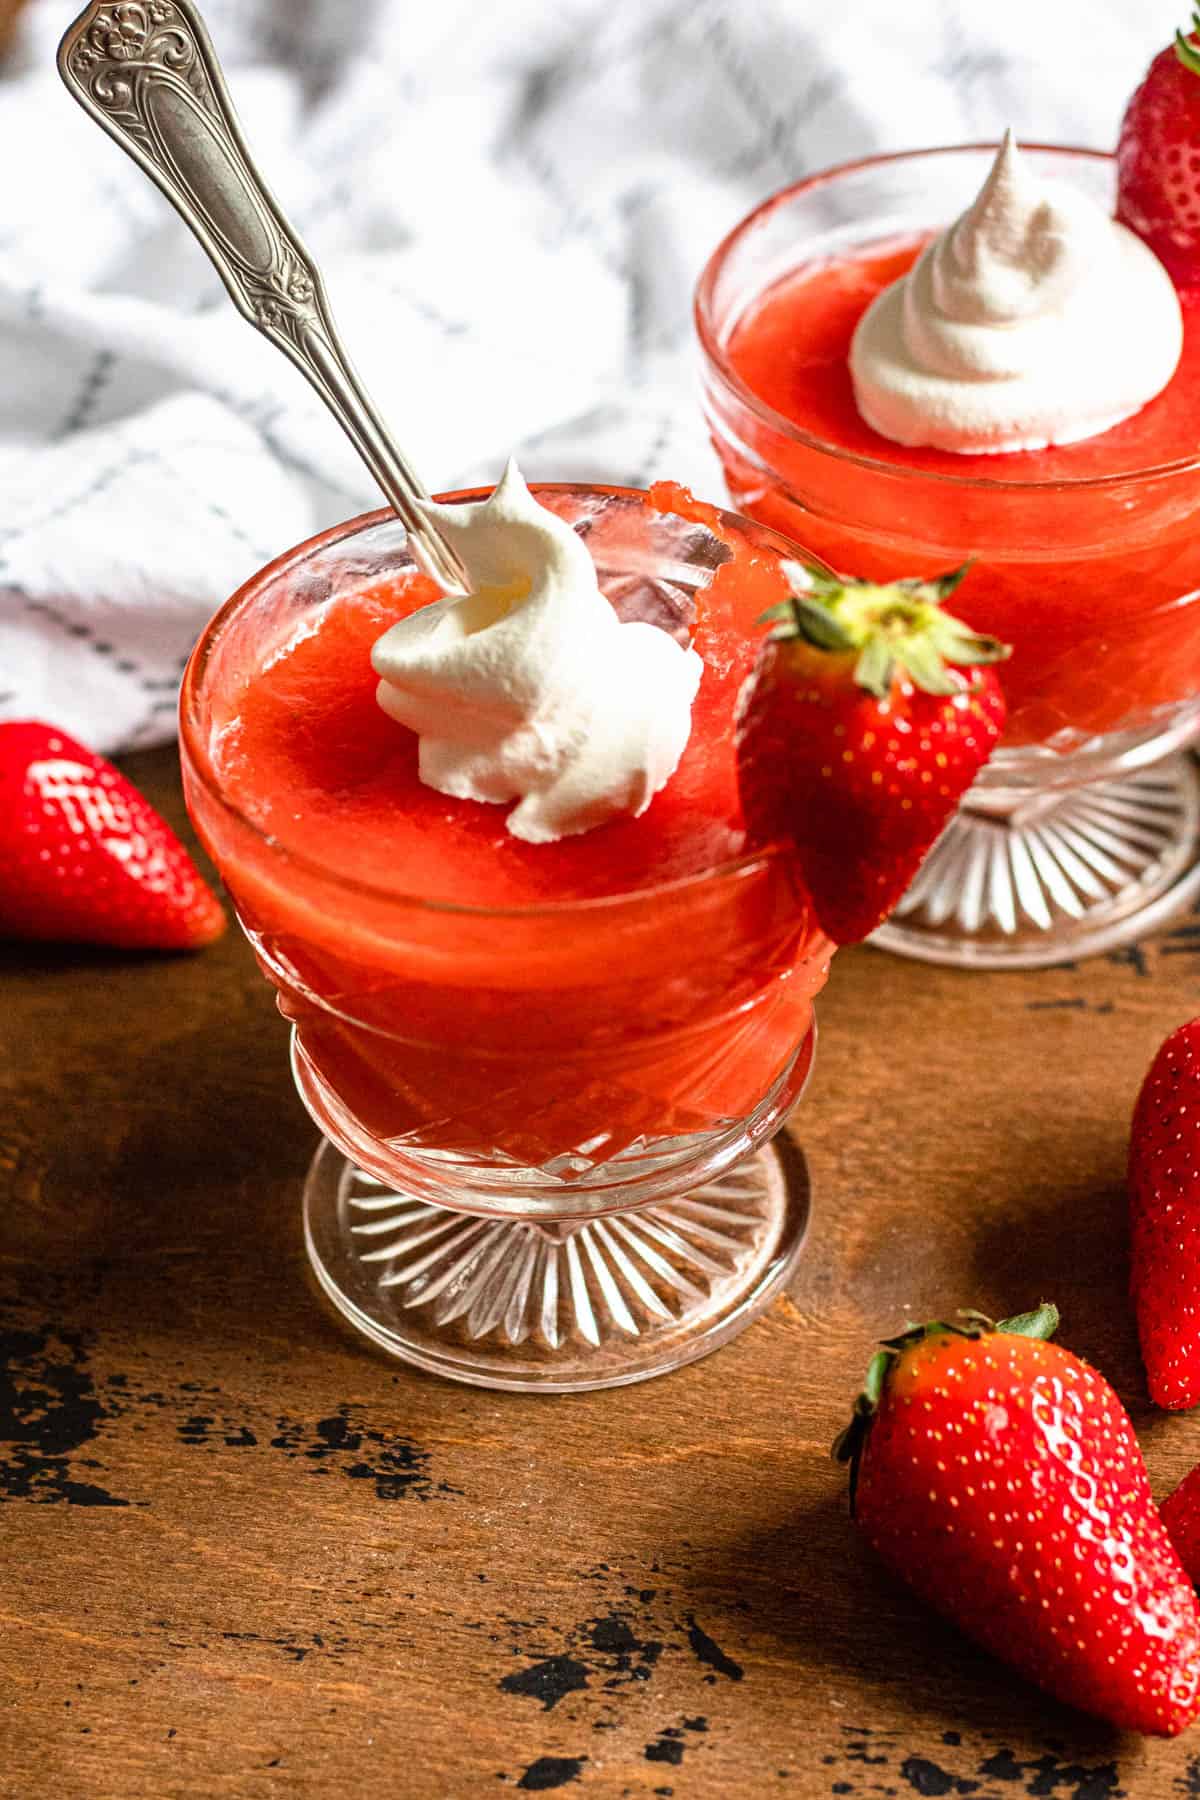 Spoons tucked into two serving glasses of strawberry kissel with a dollop of whip cream on top and a whole strawberry. 